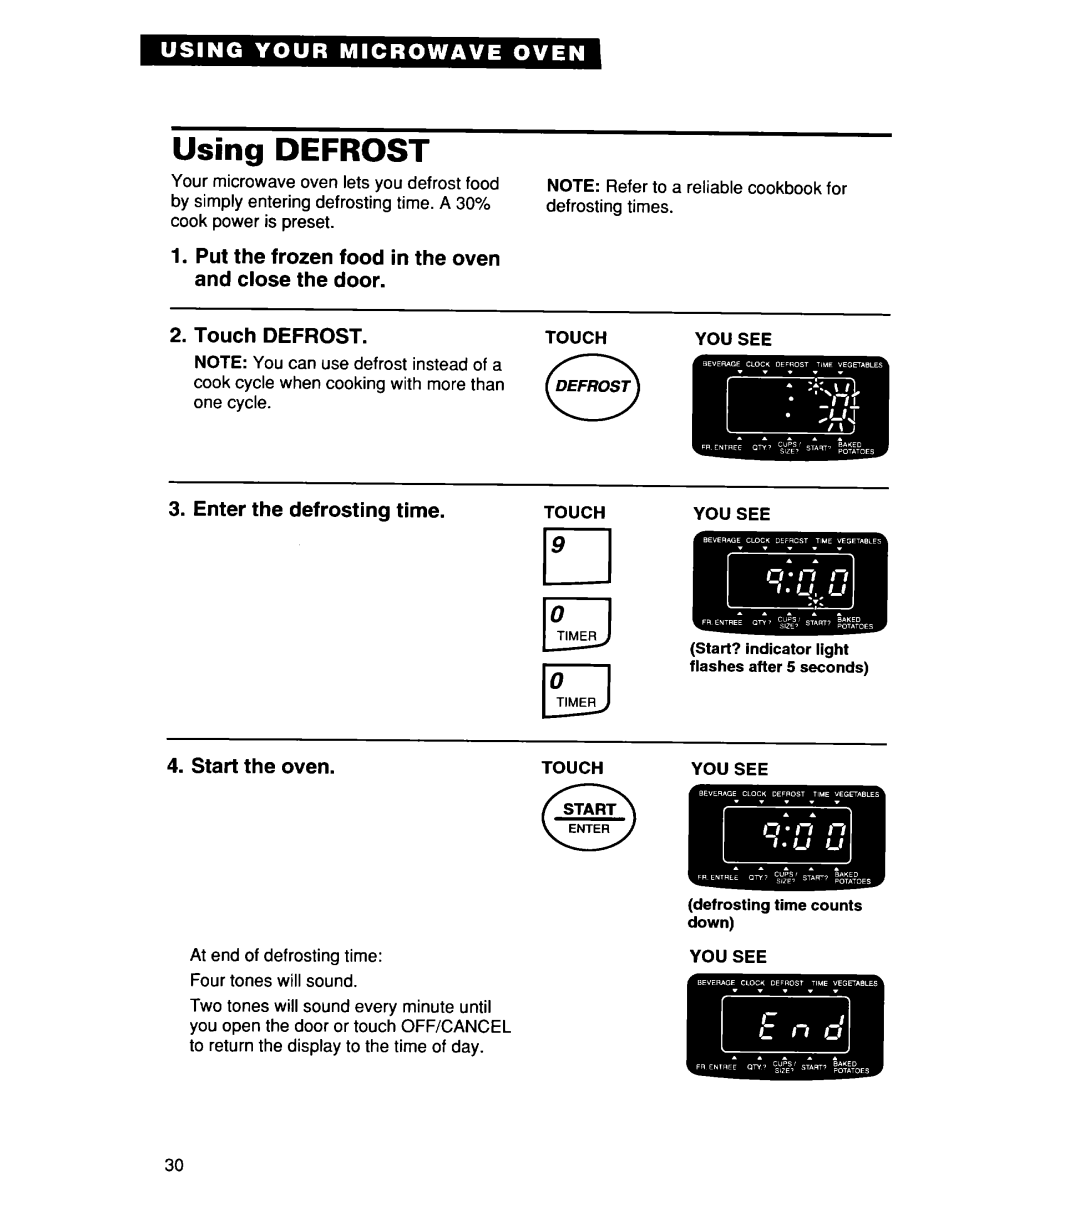 Whirlpool YMT8076SE, YMT9114SF, MT8118XE, MT8116XE Using DEFROST, Touch DEFROST 3. Enter the defrosting time, Start the oven 